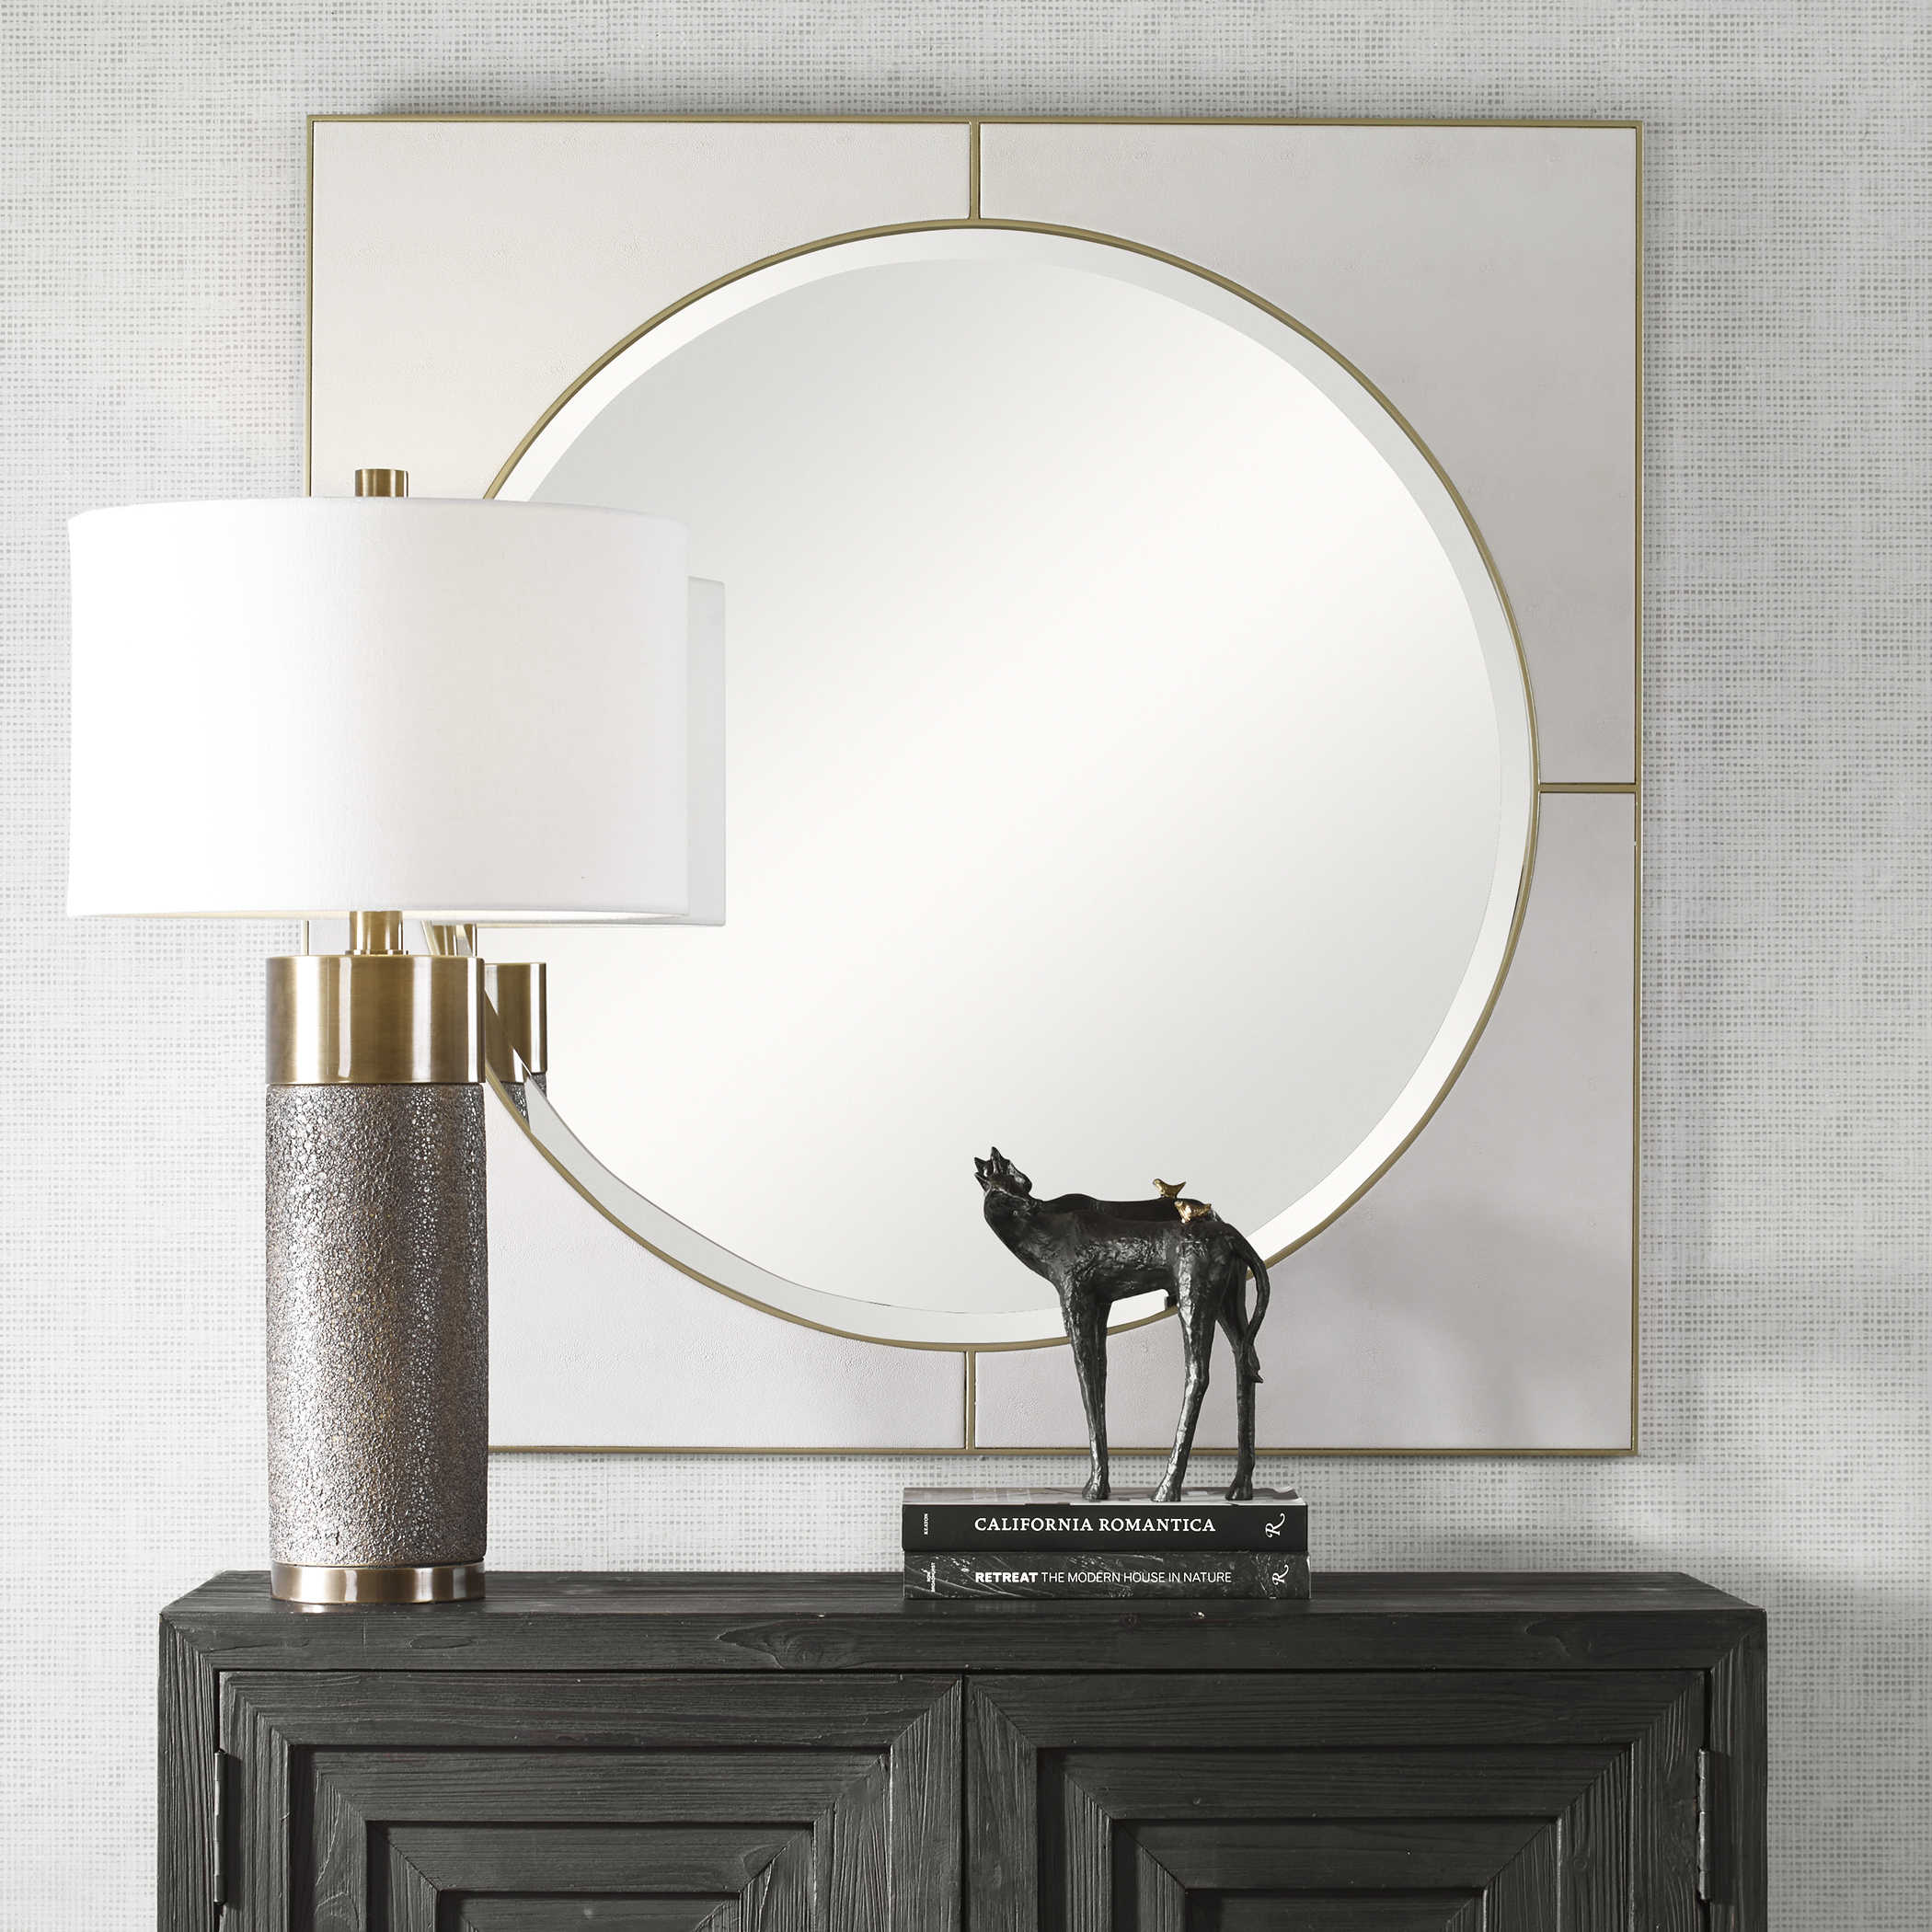 Decorate with leather mirrors. Elevate your walls with a leather mirror. This photo shows a circular mirror surrounded by a square of faux leather encased in a gold frame